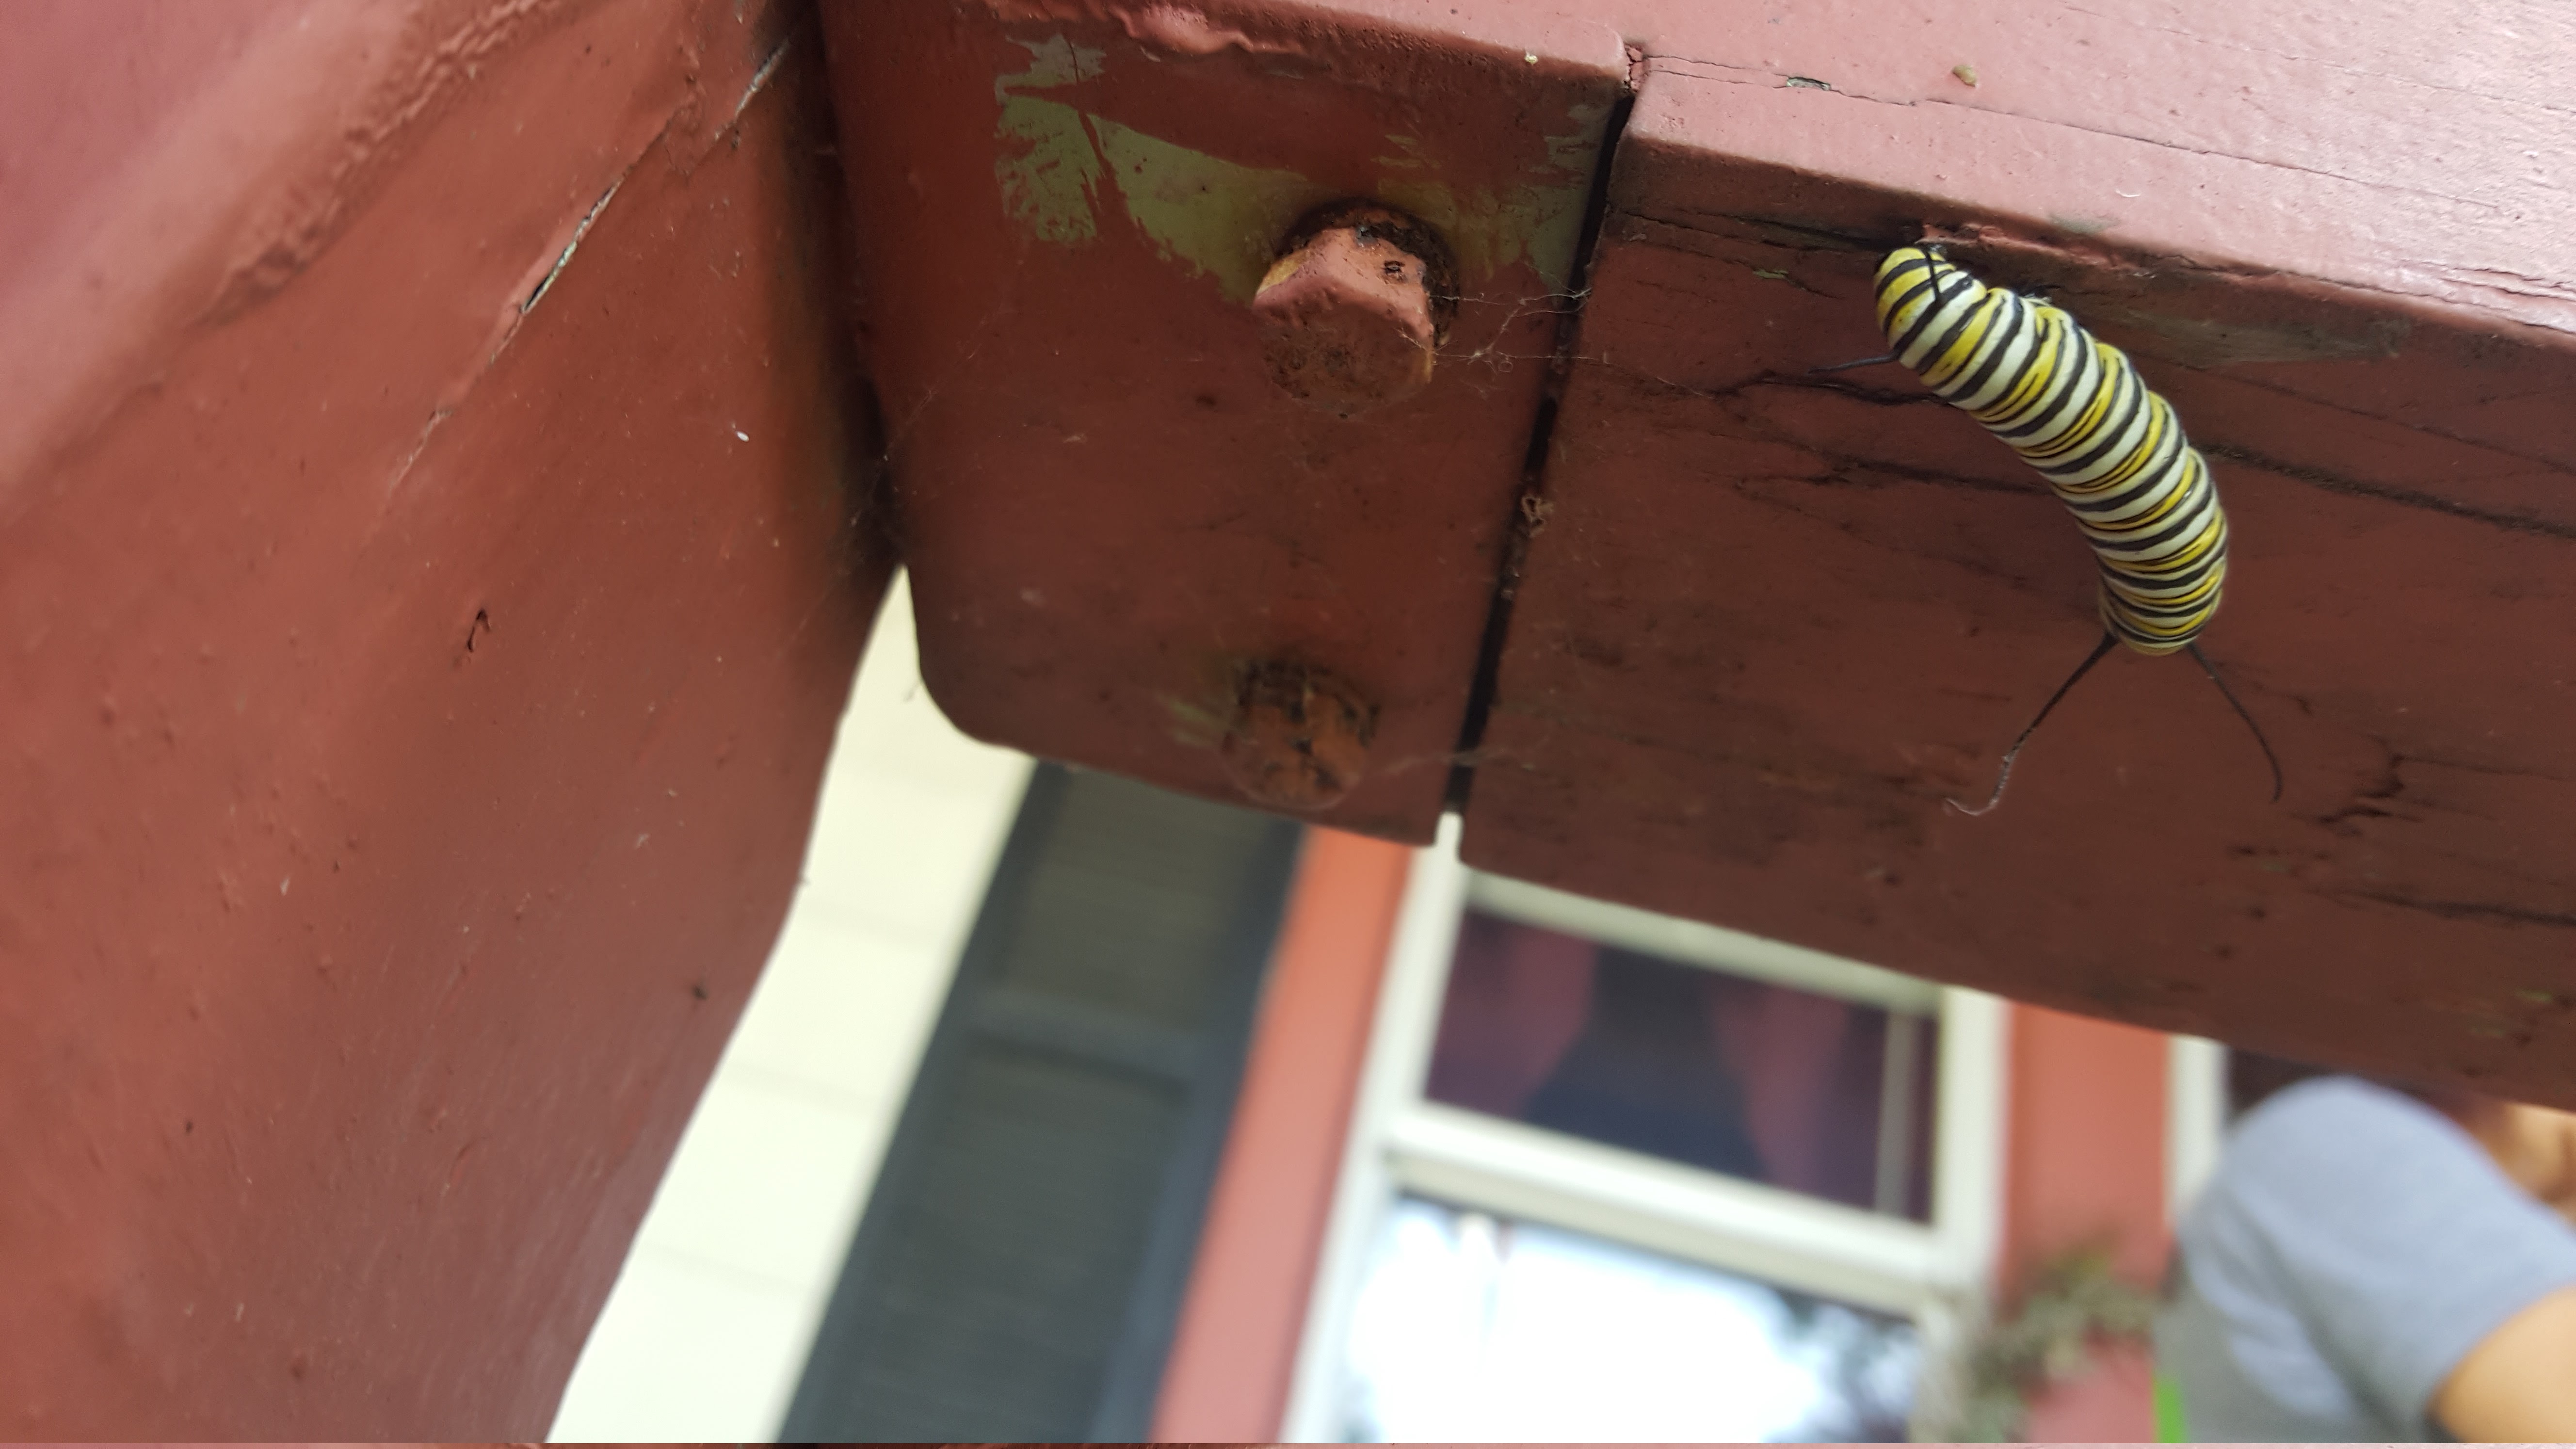 Here is a picture of a monarch caterpillar that is on the underside of the railing.